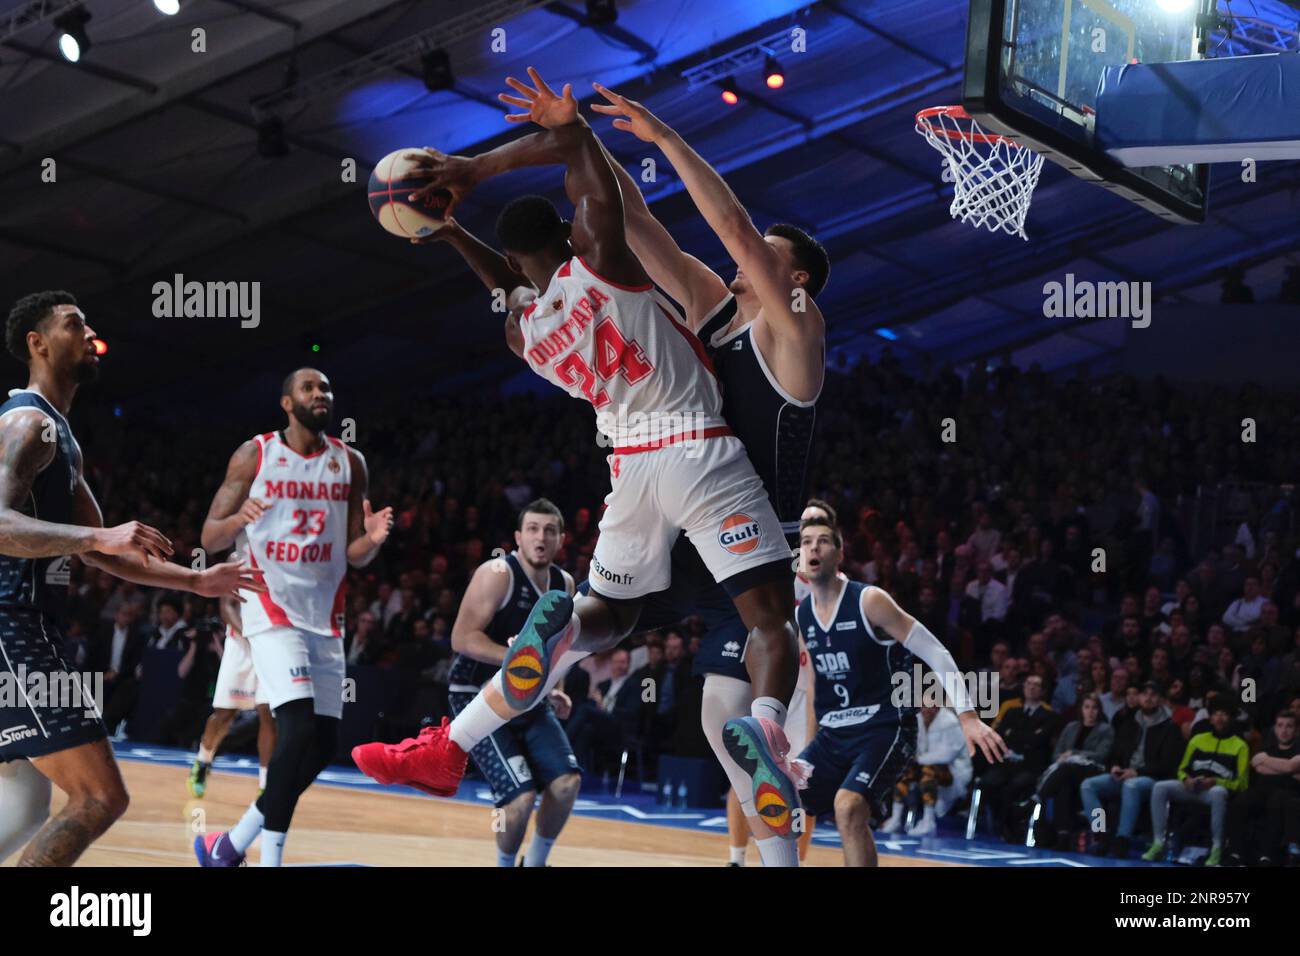 February 15, 2020, Marne La Vallee, Seine et Marne, France: Monaco player  OUATTARA YAKUBA in action during the LNB Basket Leaders Cup semi-finals  between Monaco and Dijon at the Disney Events Arena